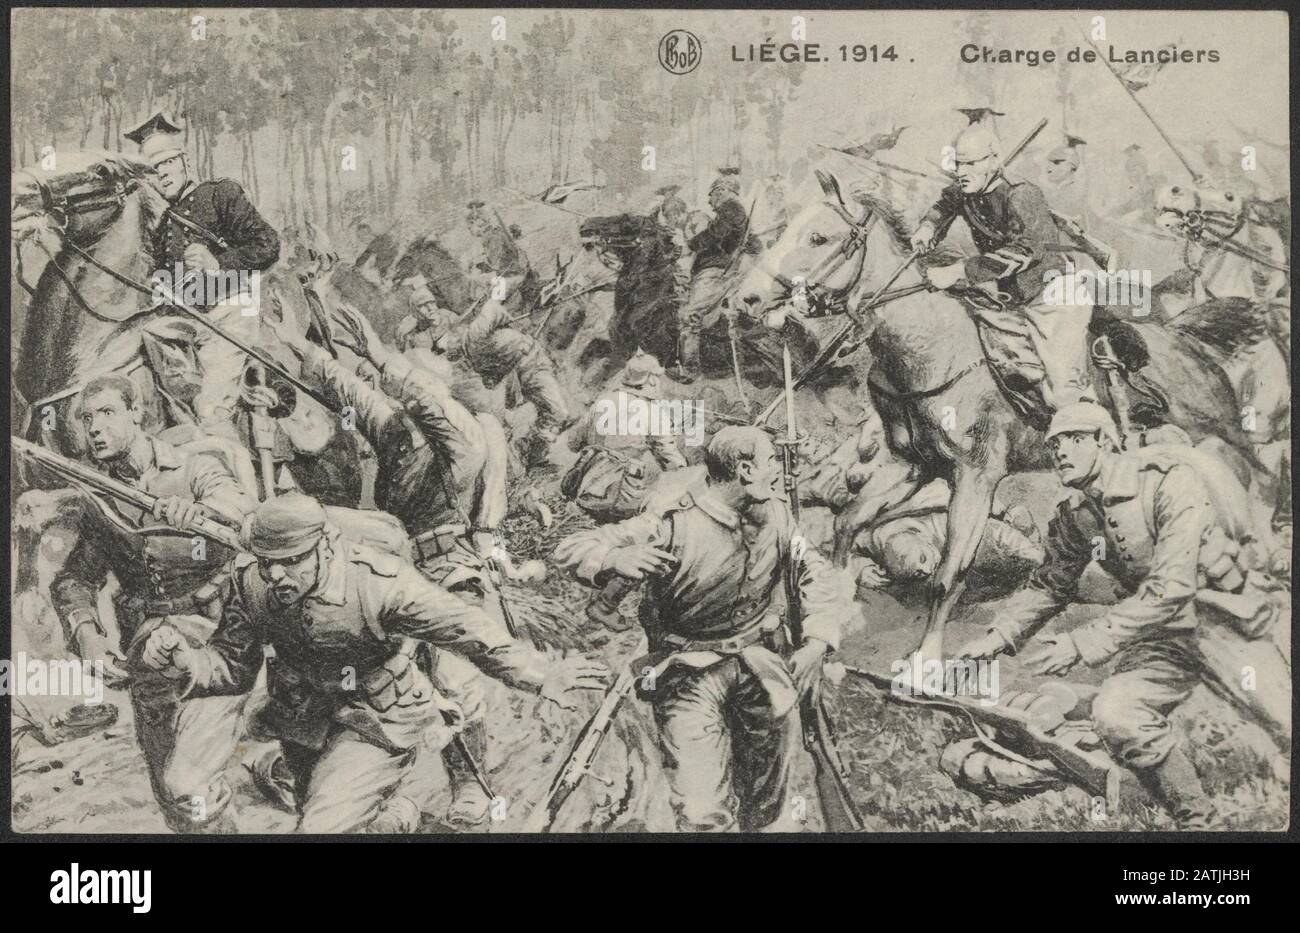 Description: Liege, 1914. Charge of the Lancers / Liège 1914. Annotation of Lancers Charge: Drawing. Date: 1914 Location: Belgium, Liege Keywords: charges, first world war, lancers, soldiers Stock Photo